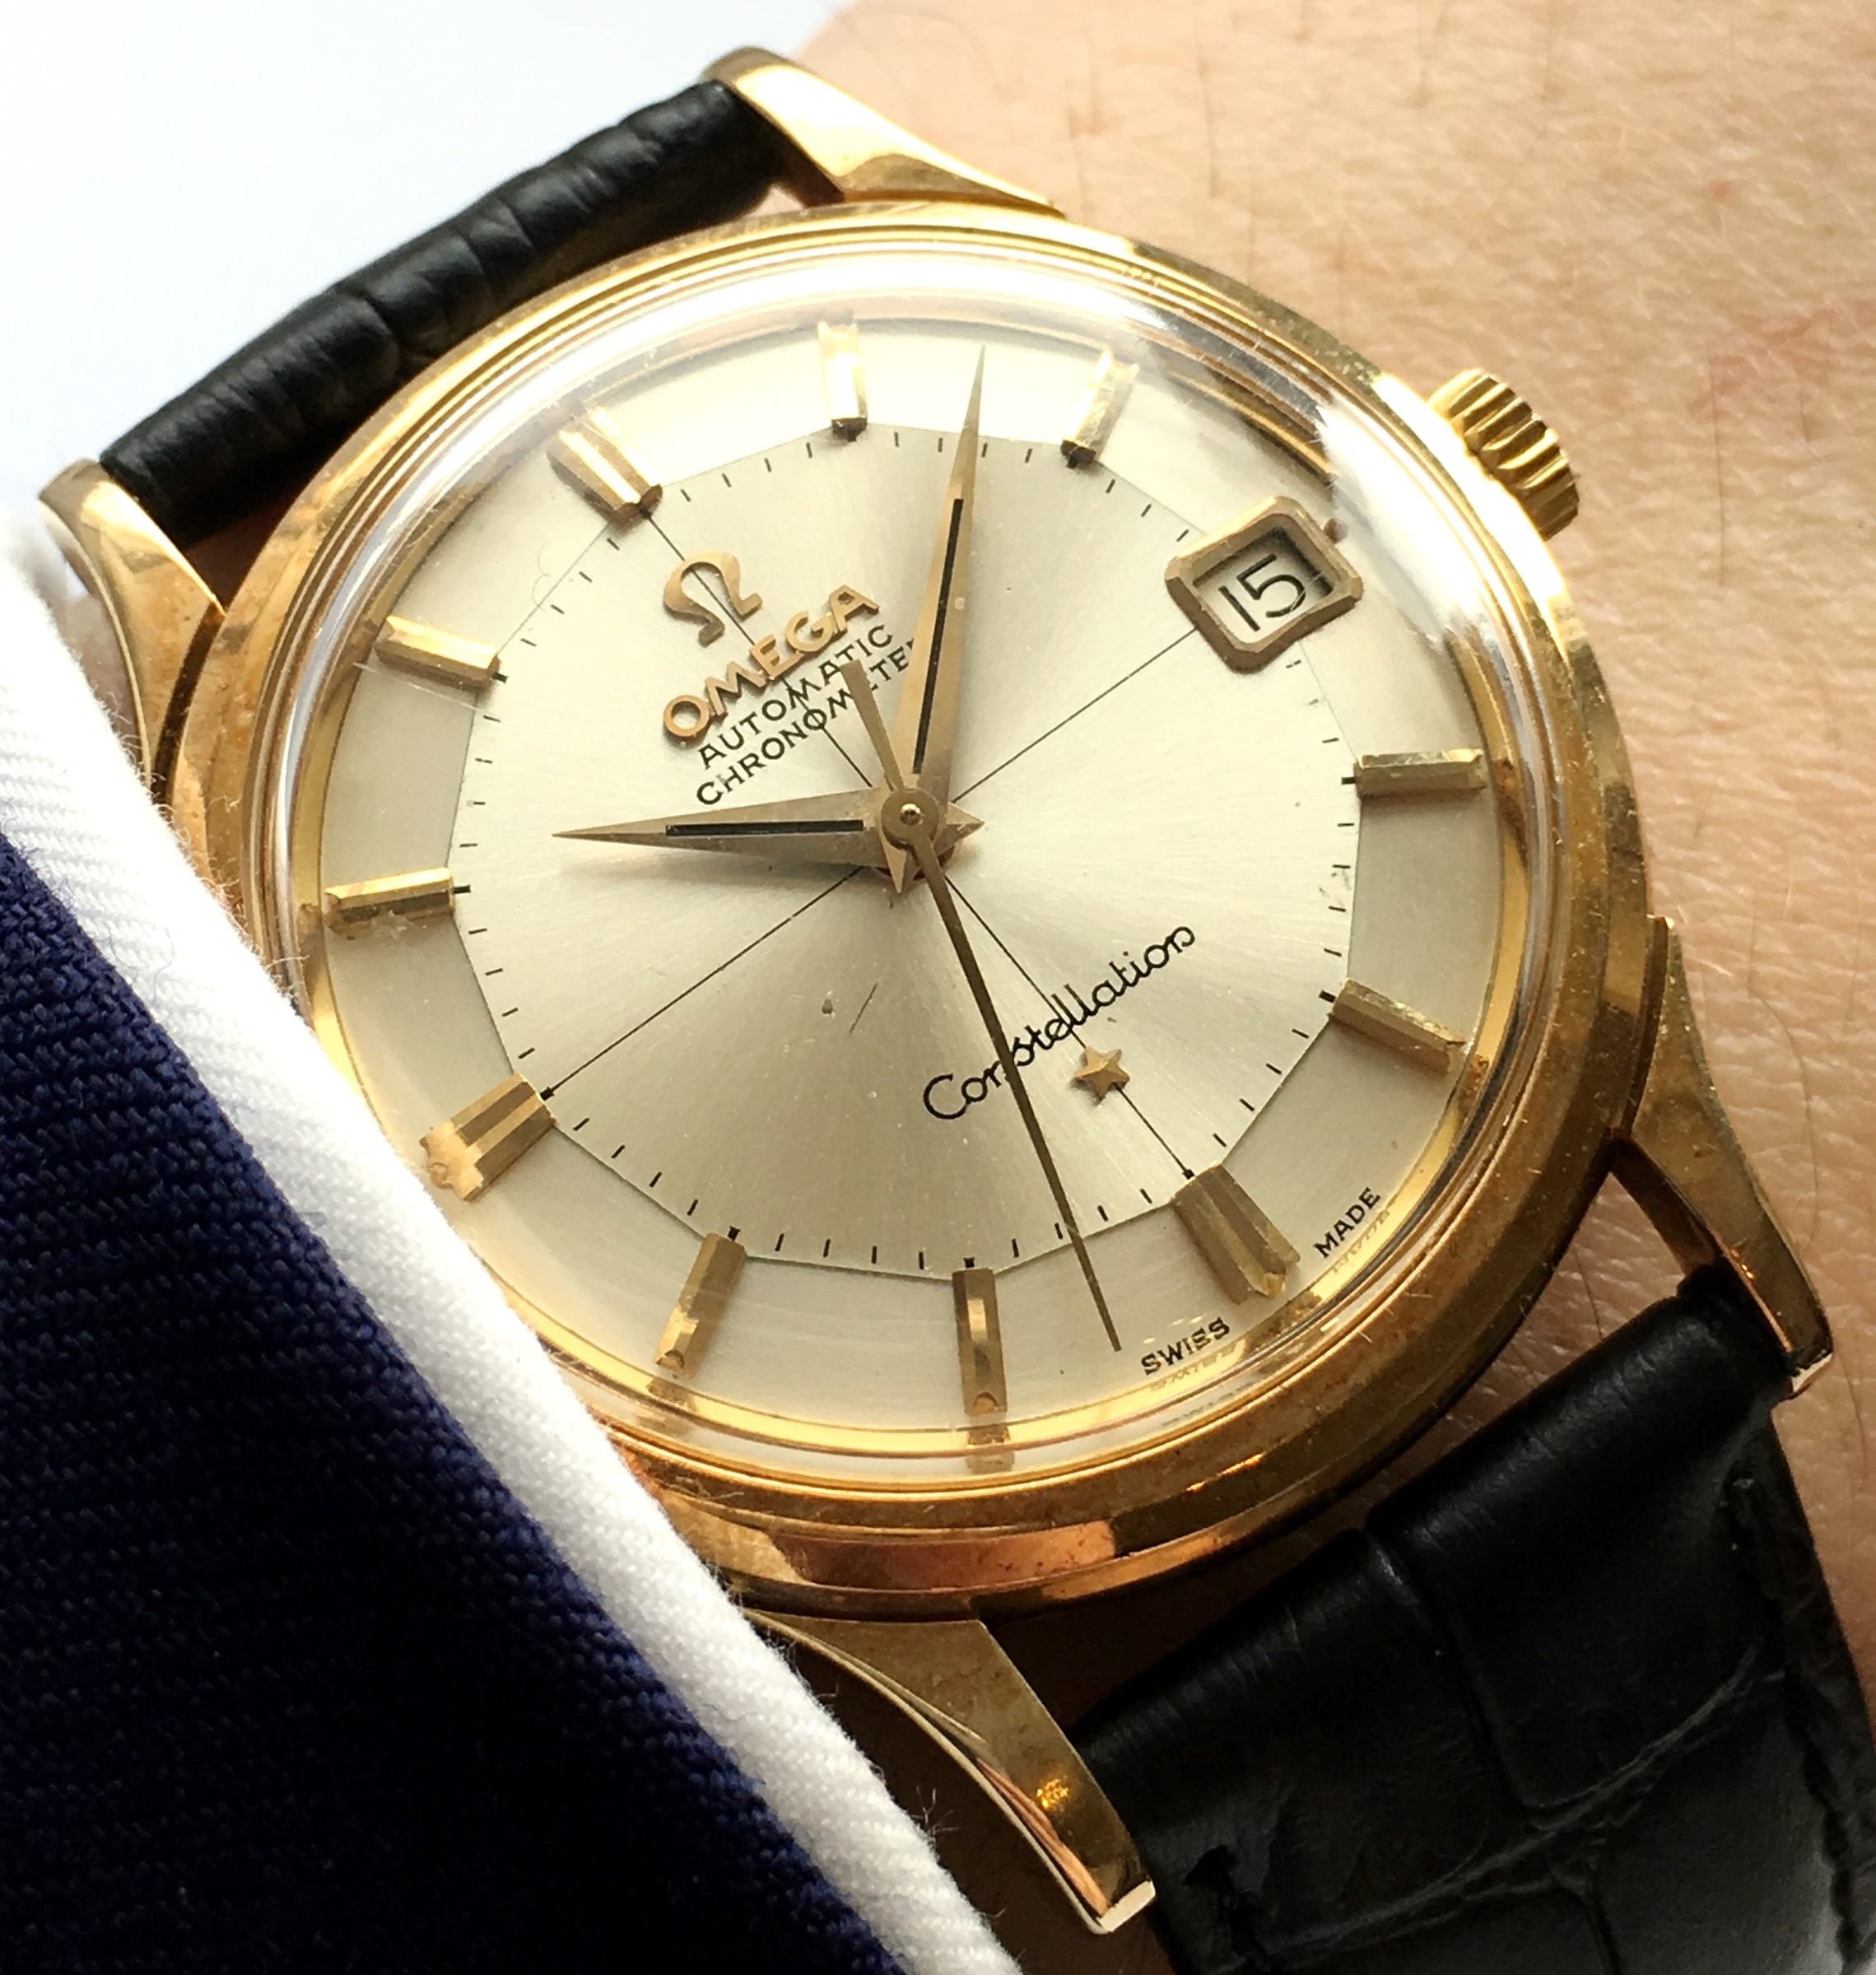 Pristine Solid Yellow Gold Omega 